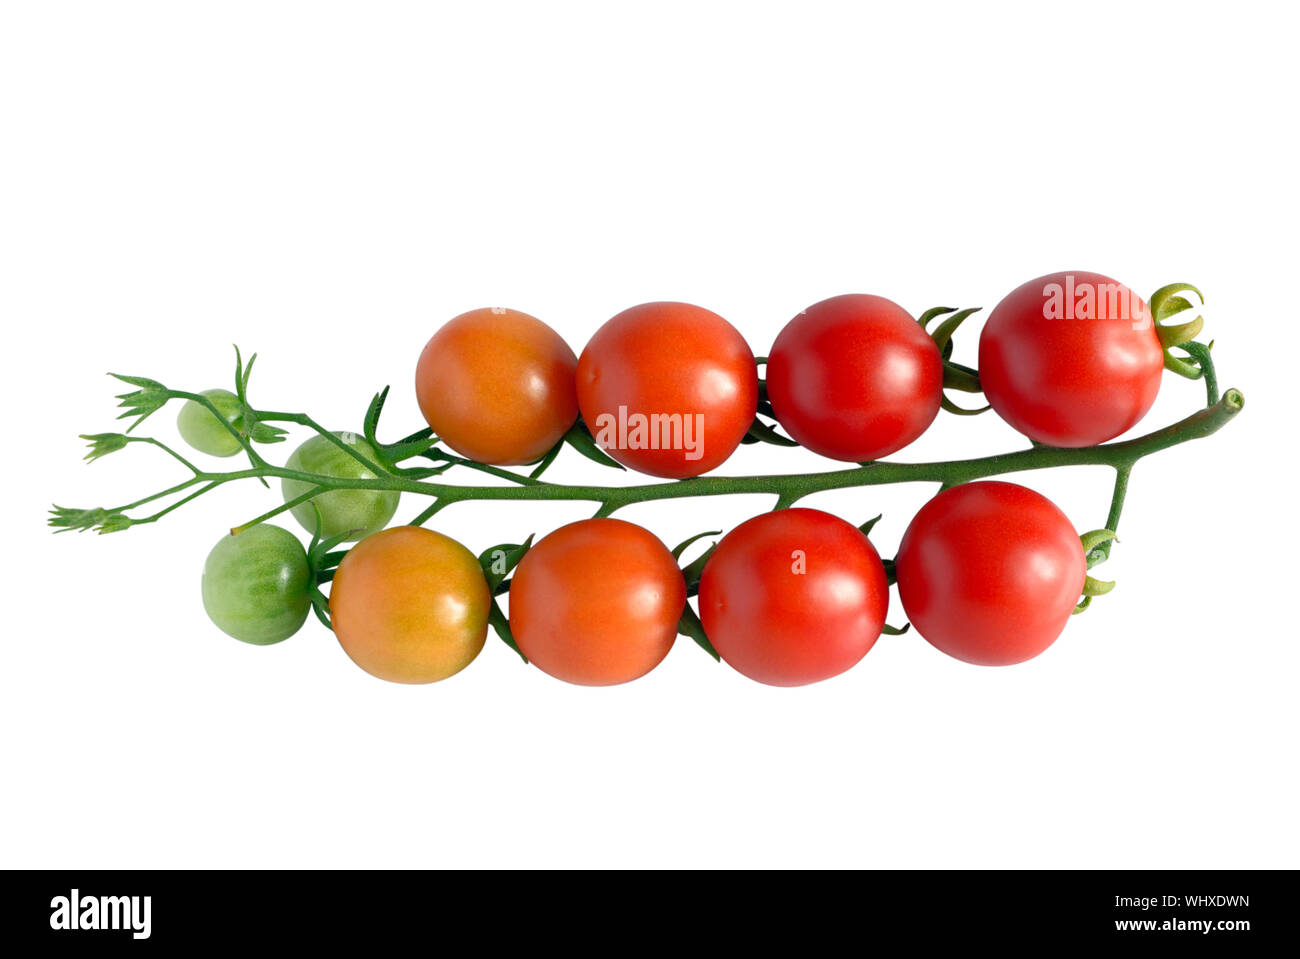 Branch of cherry tomatoes with ripe, unripe and green fruits, isolated on white, top view Stock Photo